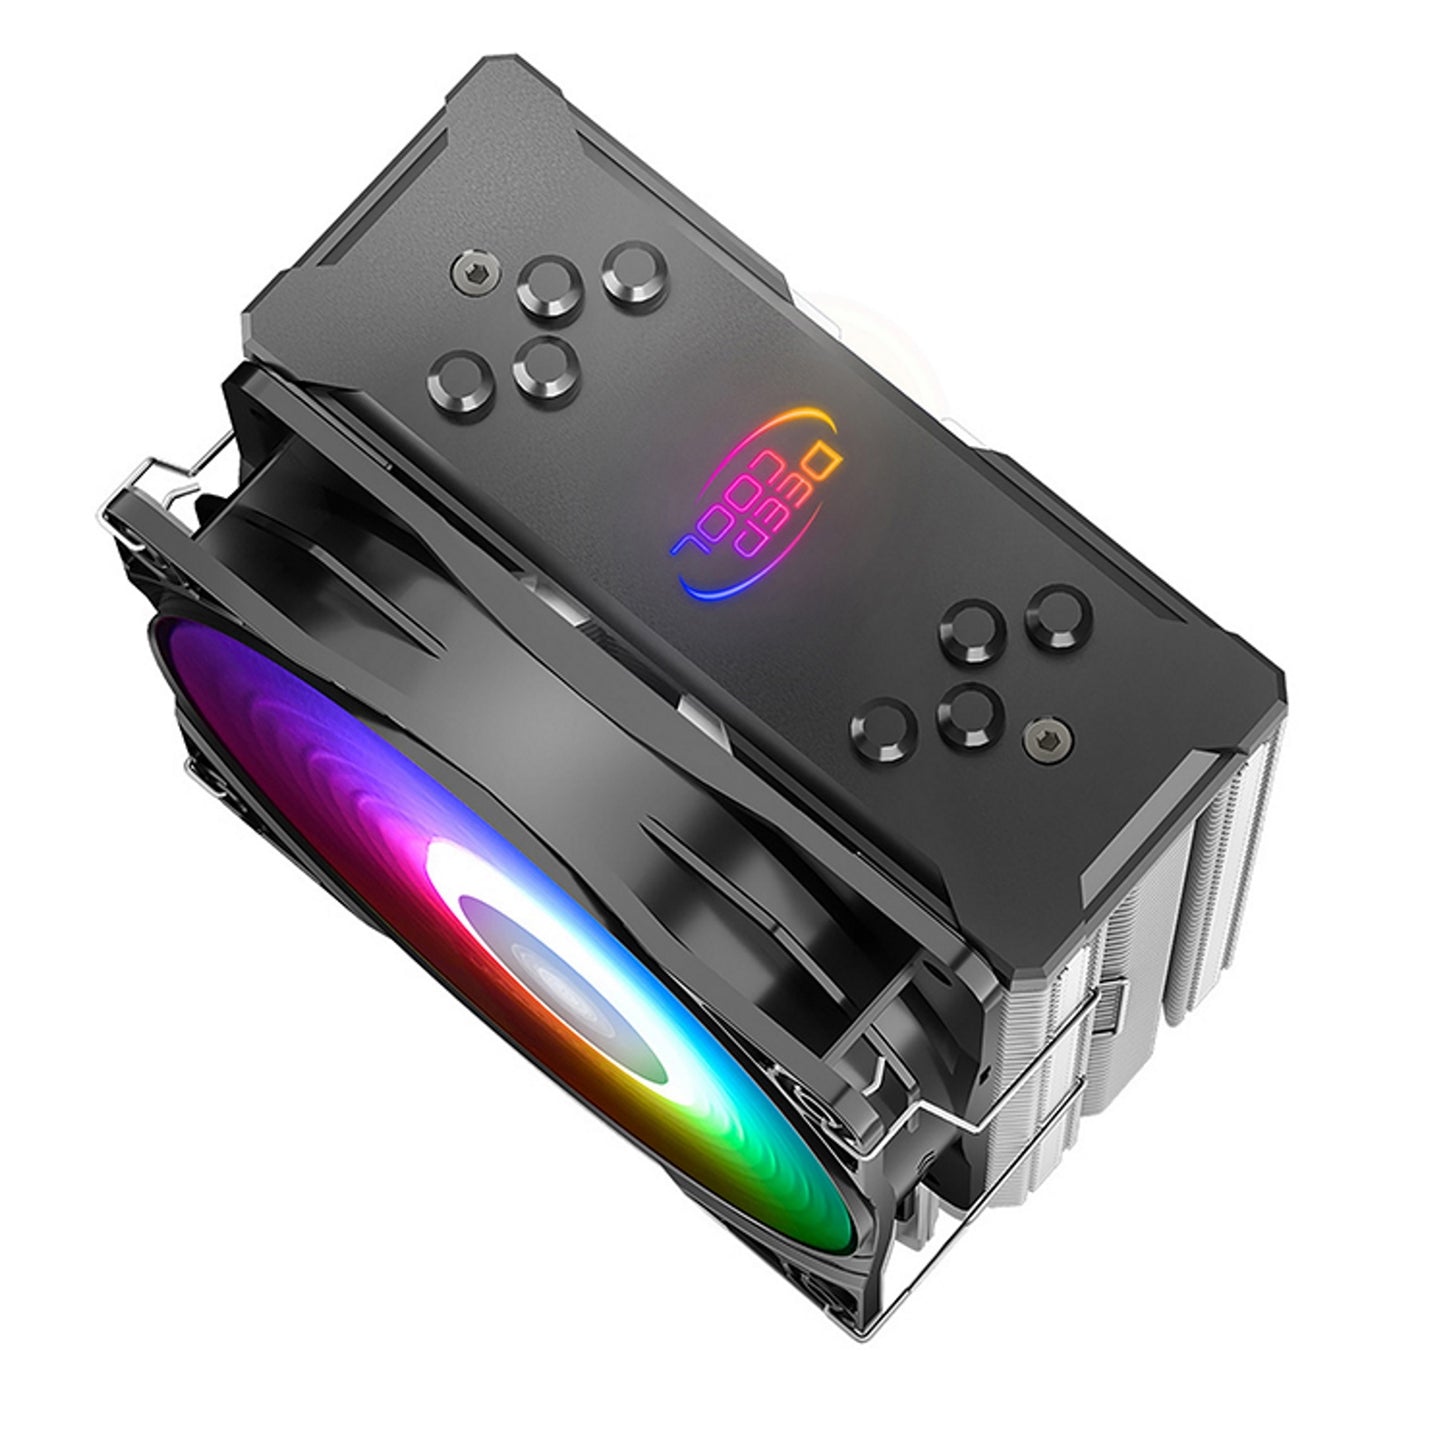 DeepCool GAMMAXX GT A-RGB Universal Socket 120mm PWM Addressable LED Fan PC CPU Cooler with Wired RGB Controller